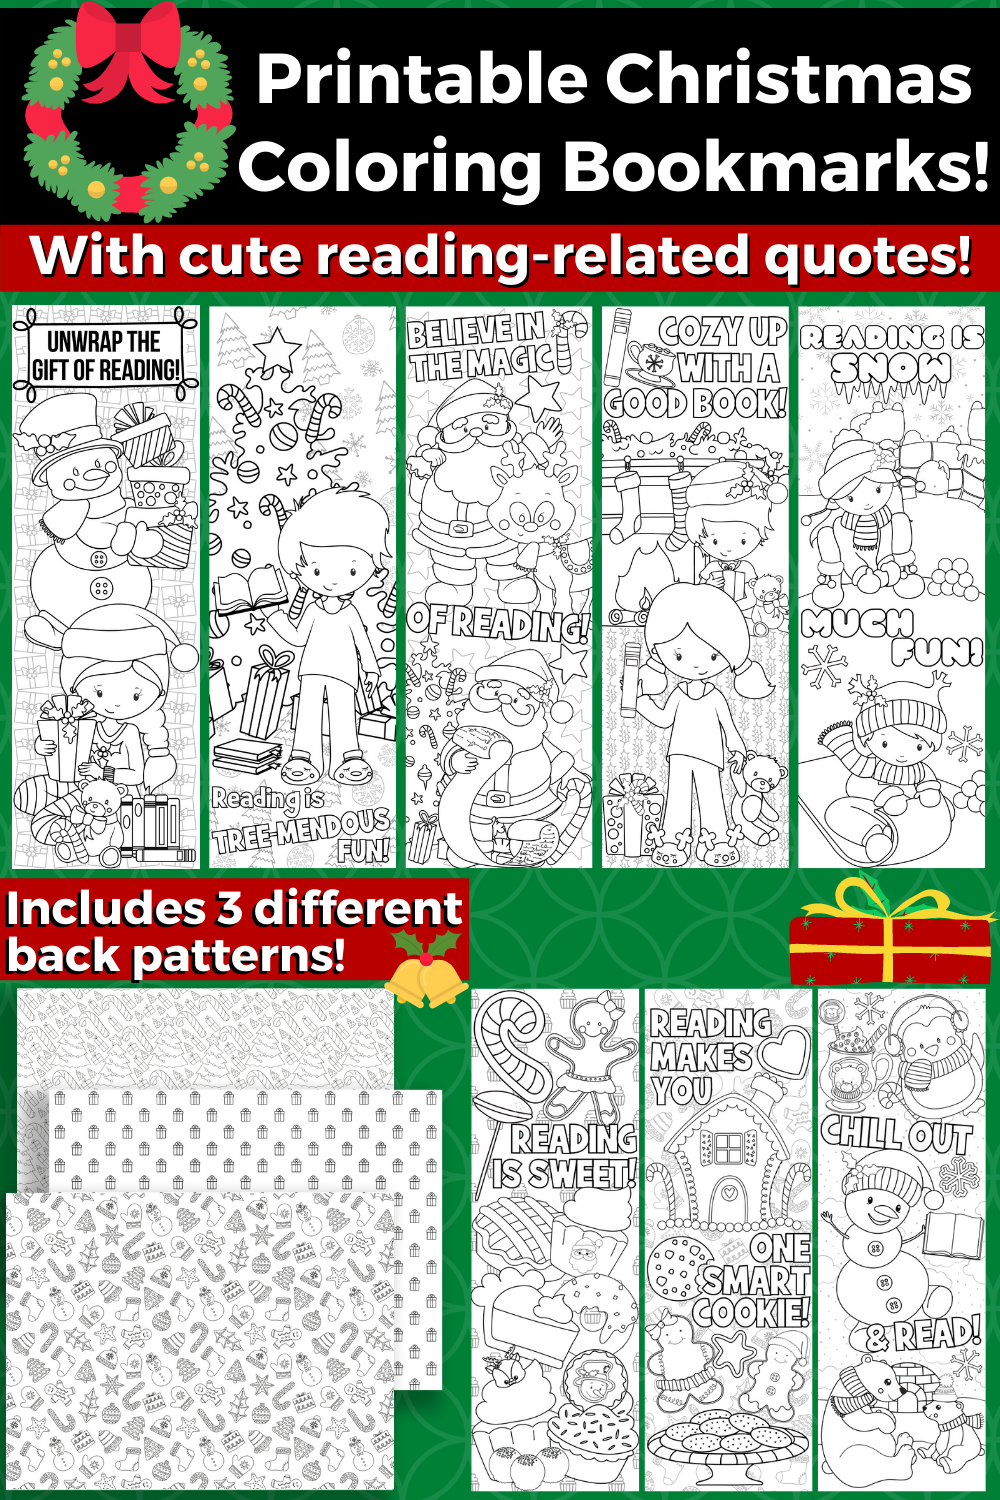 Picture of 8 printable Christmas coloring bookmarks including the 3 different back patterns.